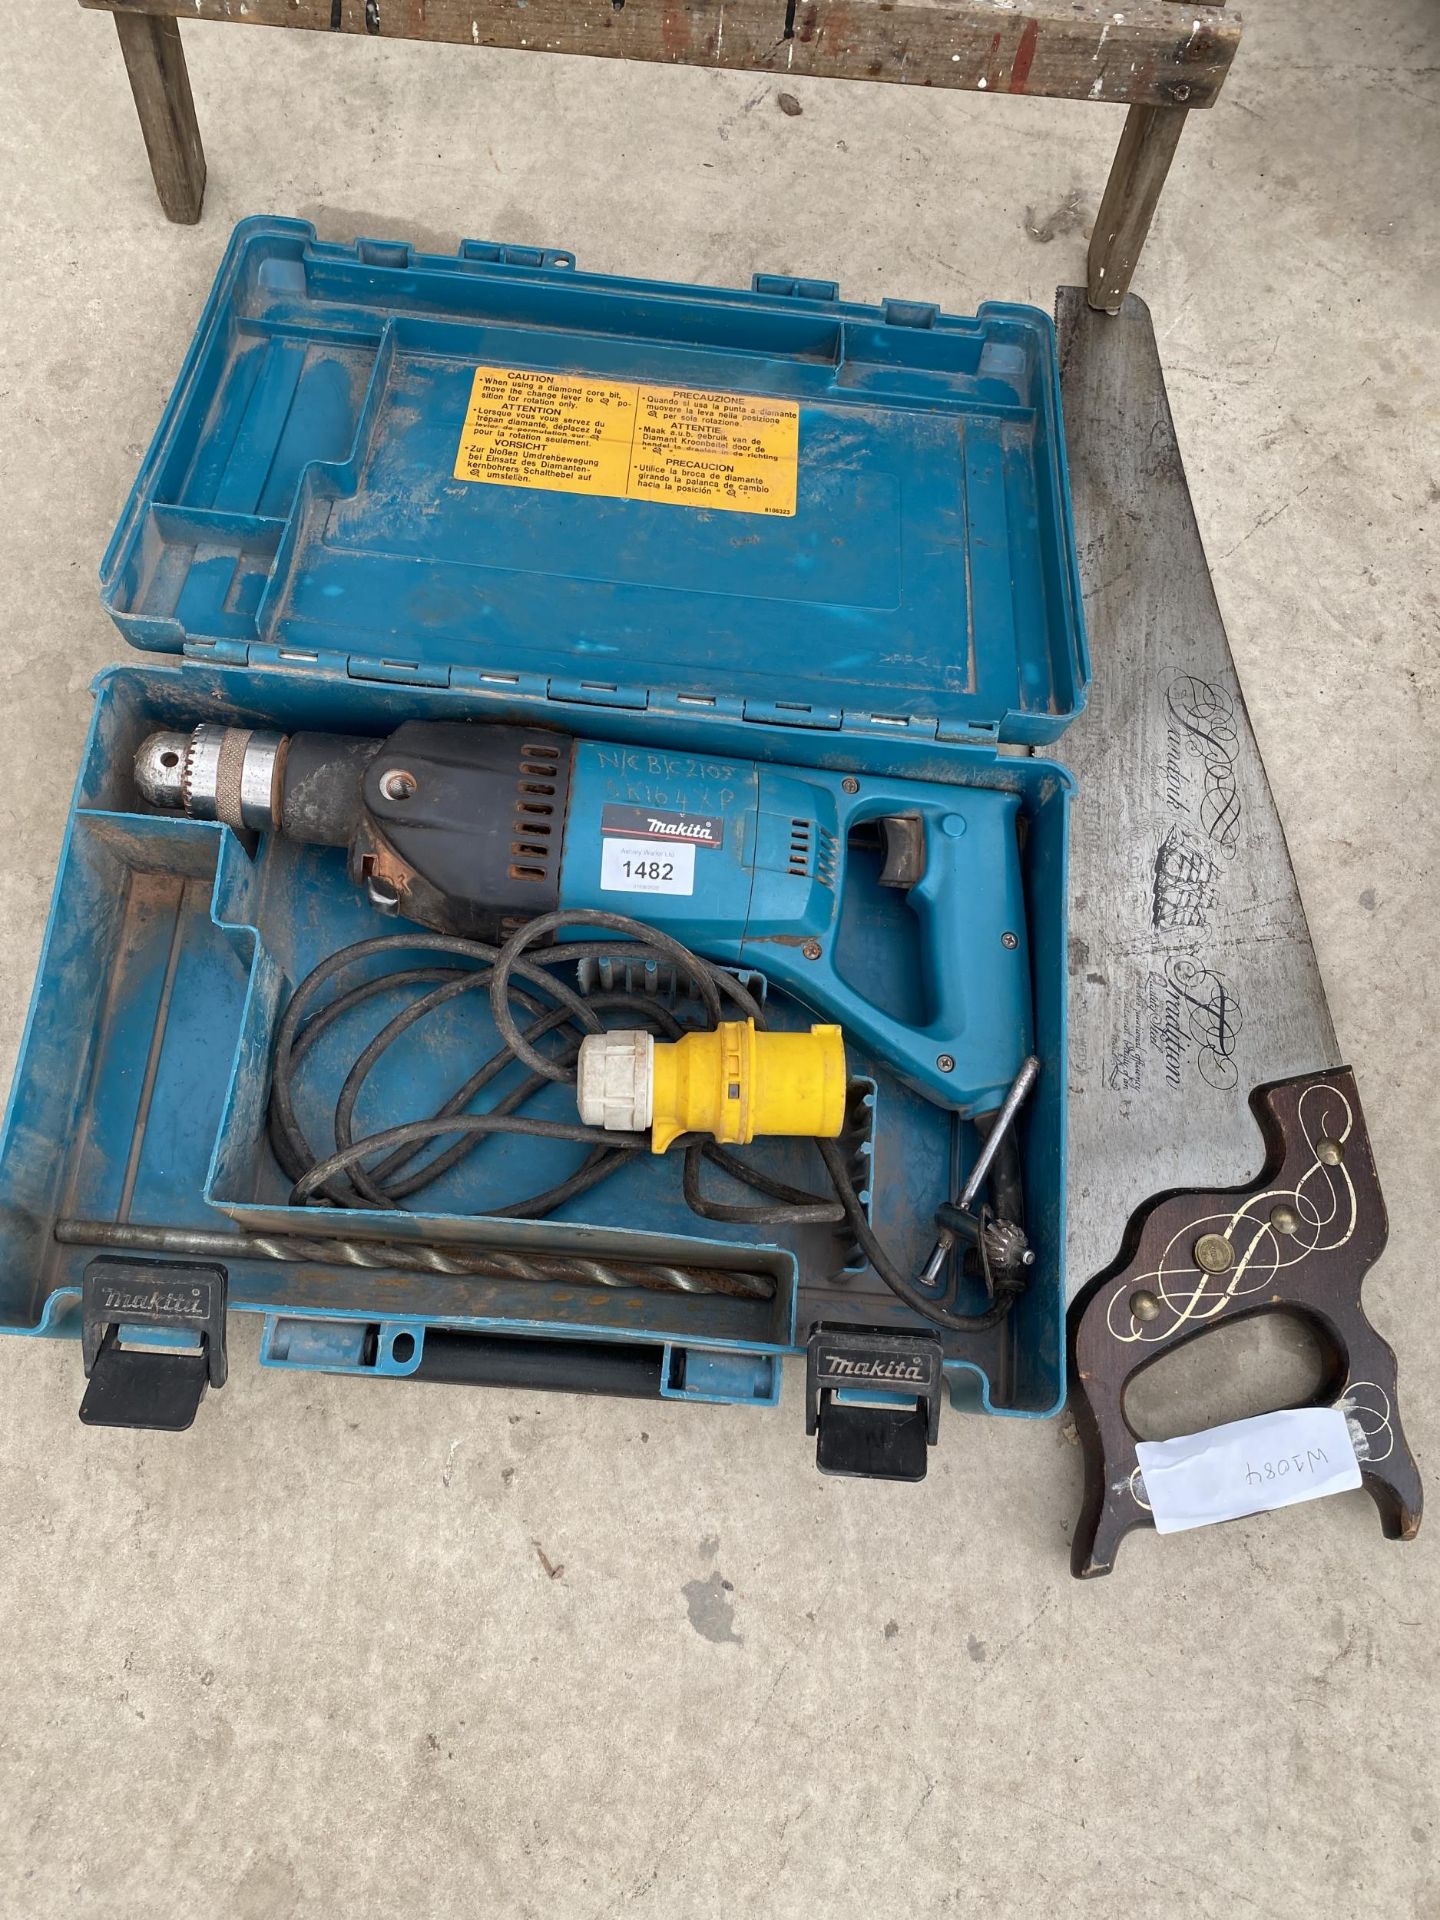 A MAKITA 110V DRILL AND A VINTAGE HAND SAW